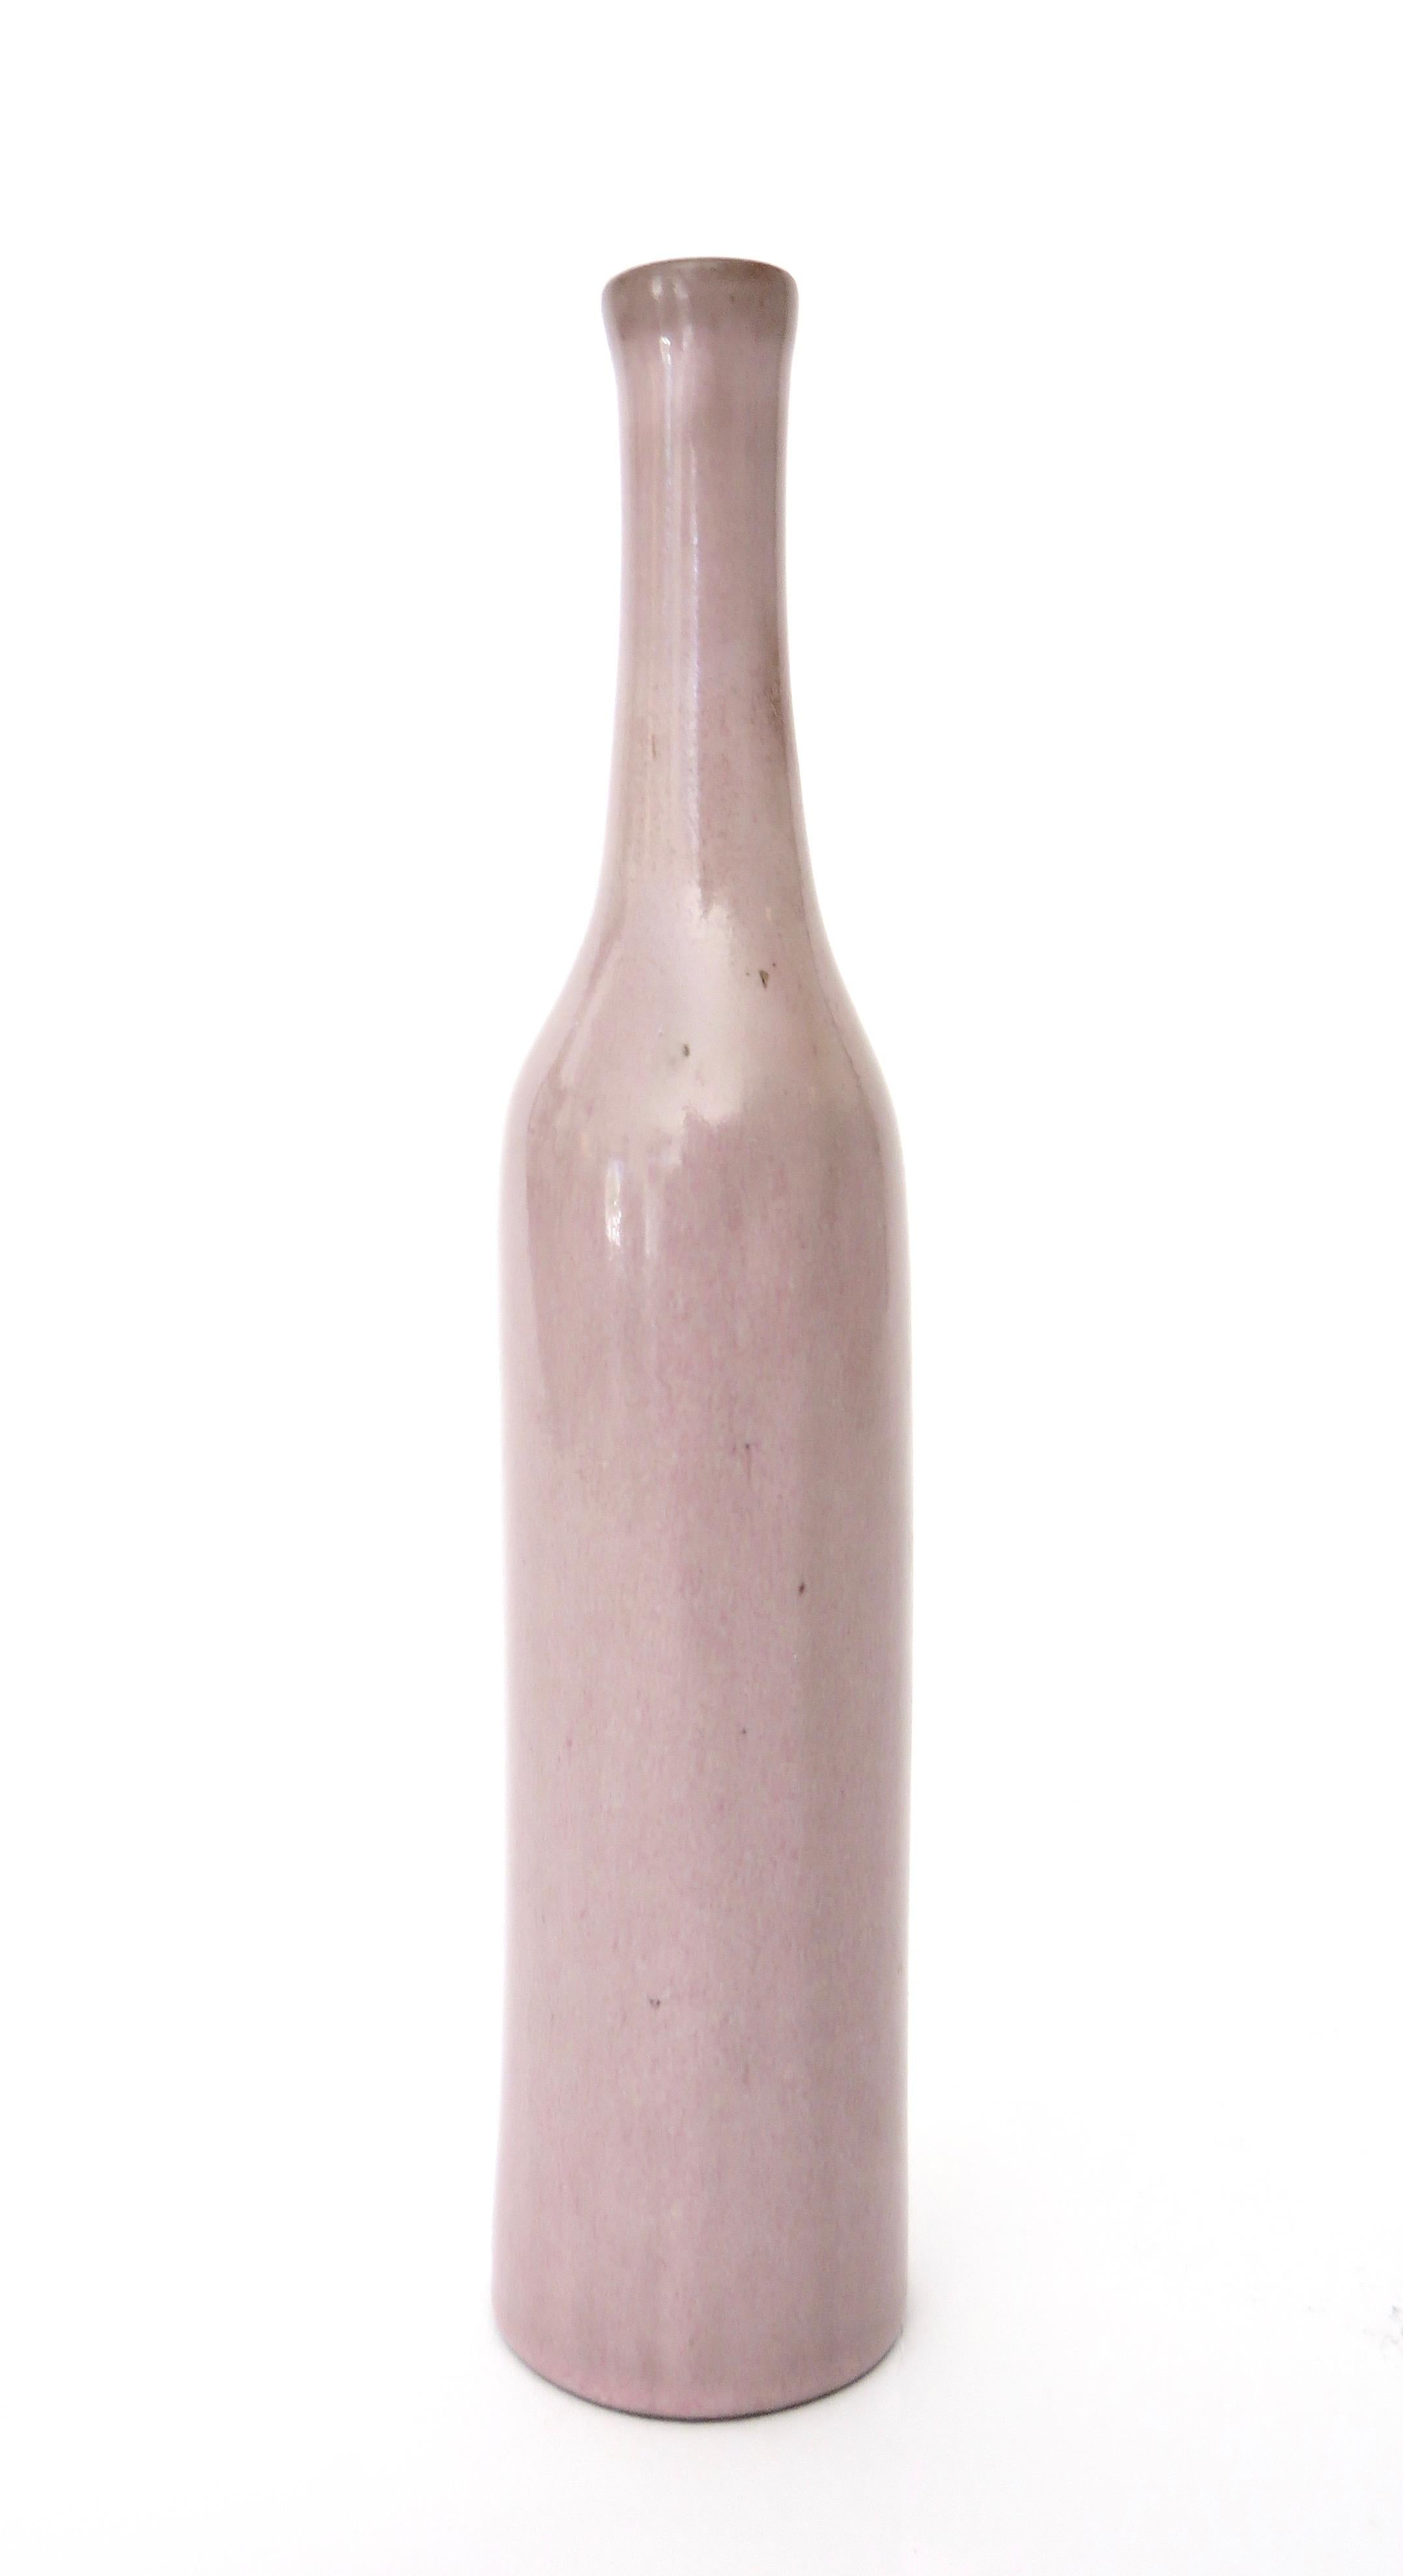 Mid-20th Century Jacques and Dani Ruelland French Ceramic Bottle in Pale Rose Lavender Glaze